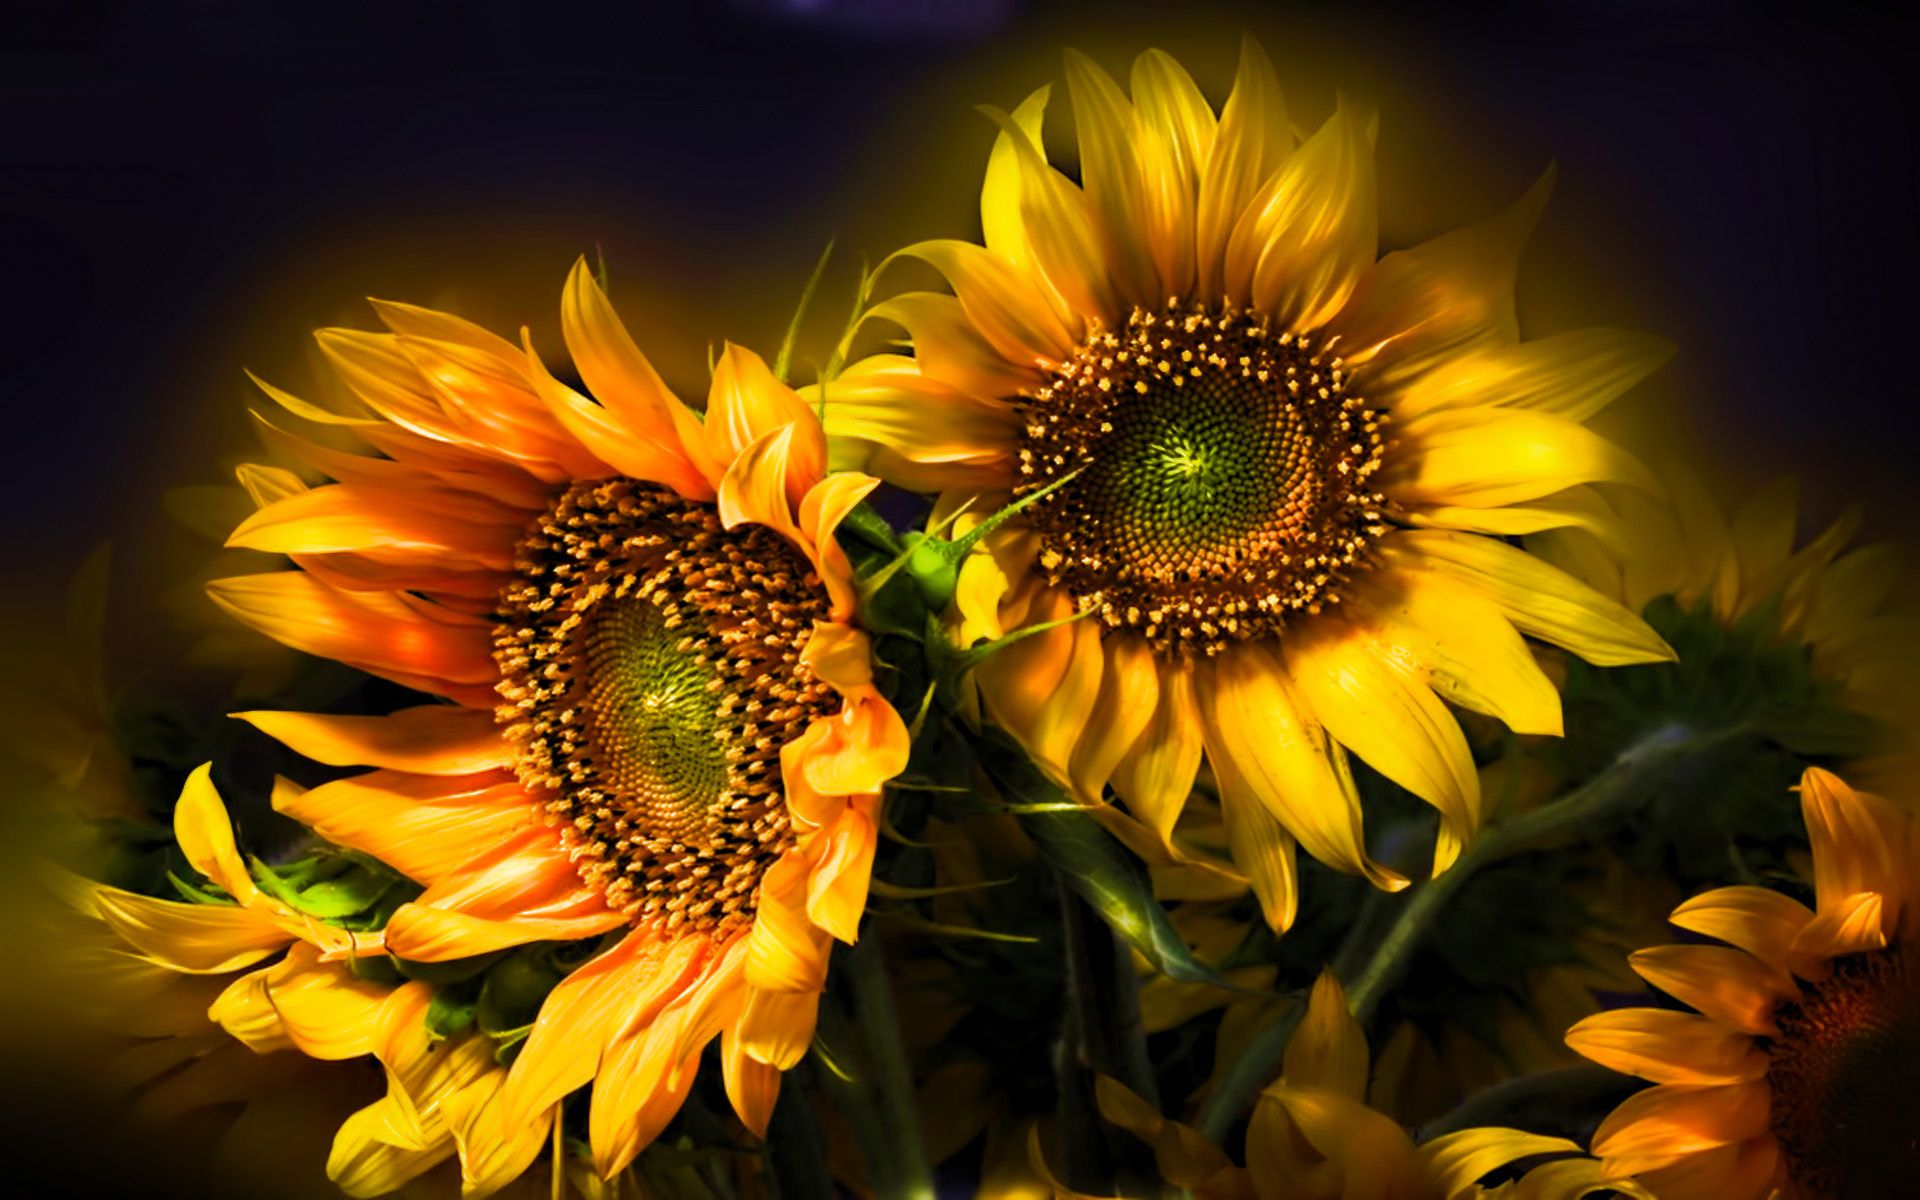 nature, Flowers, Still, Life, Bouquets, Sunflowers, Seed, Petals